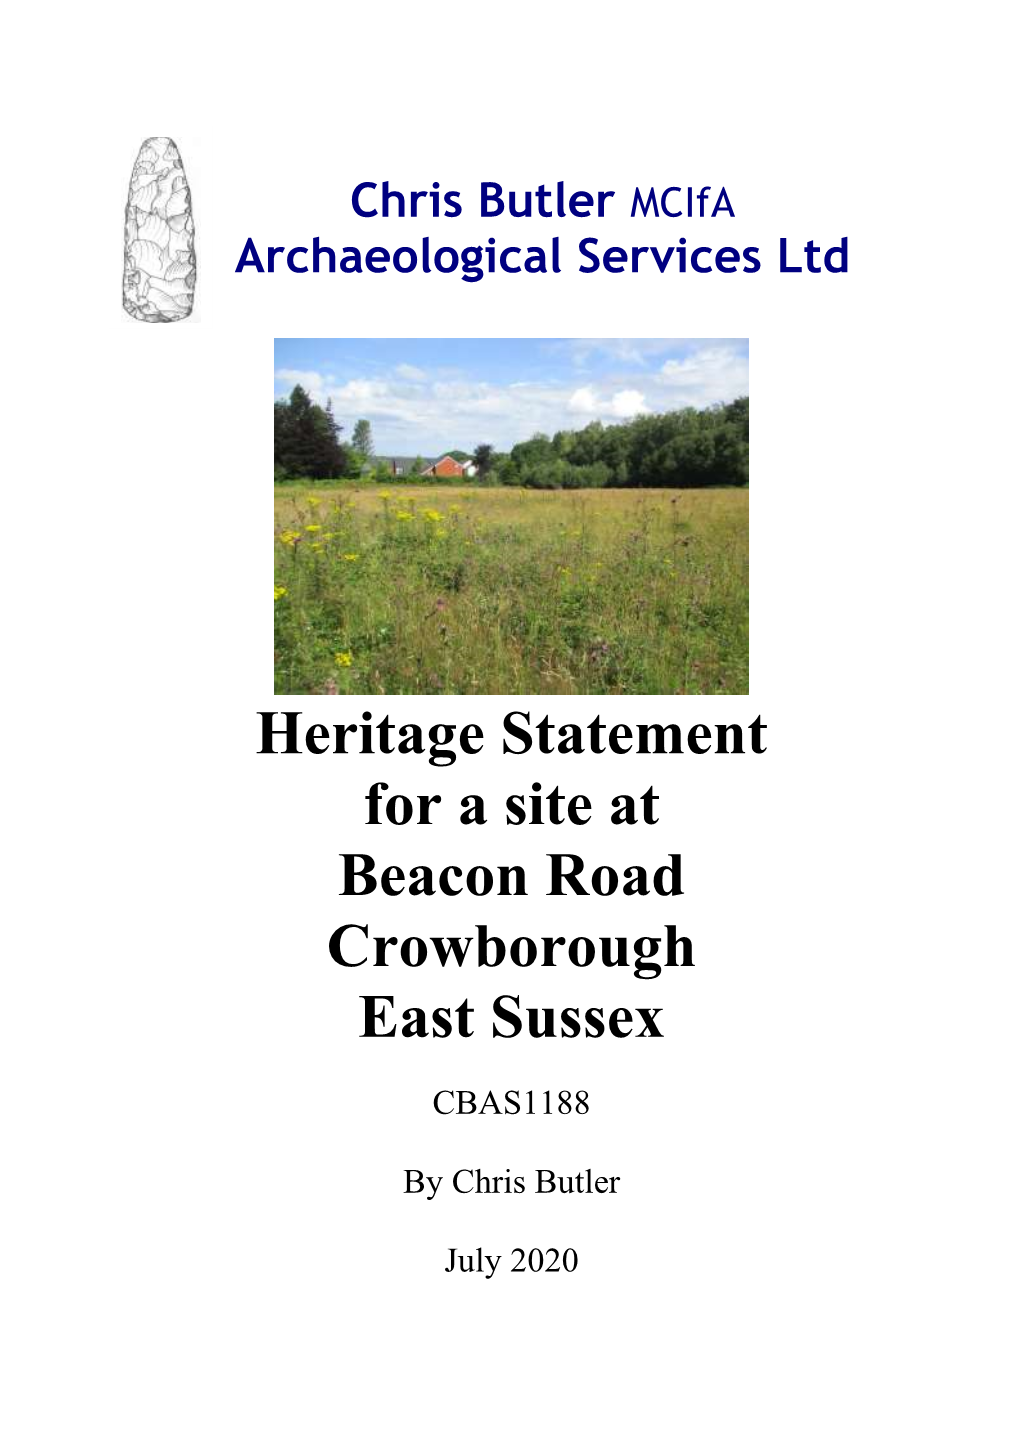 Heritage Statement for a Site at Beacon Road Crowborough East Sussex